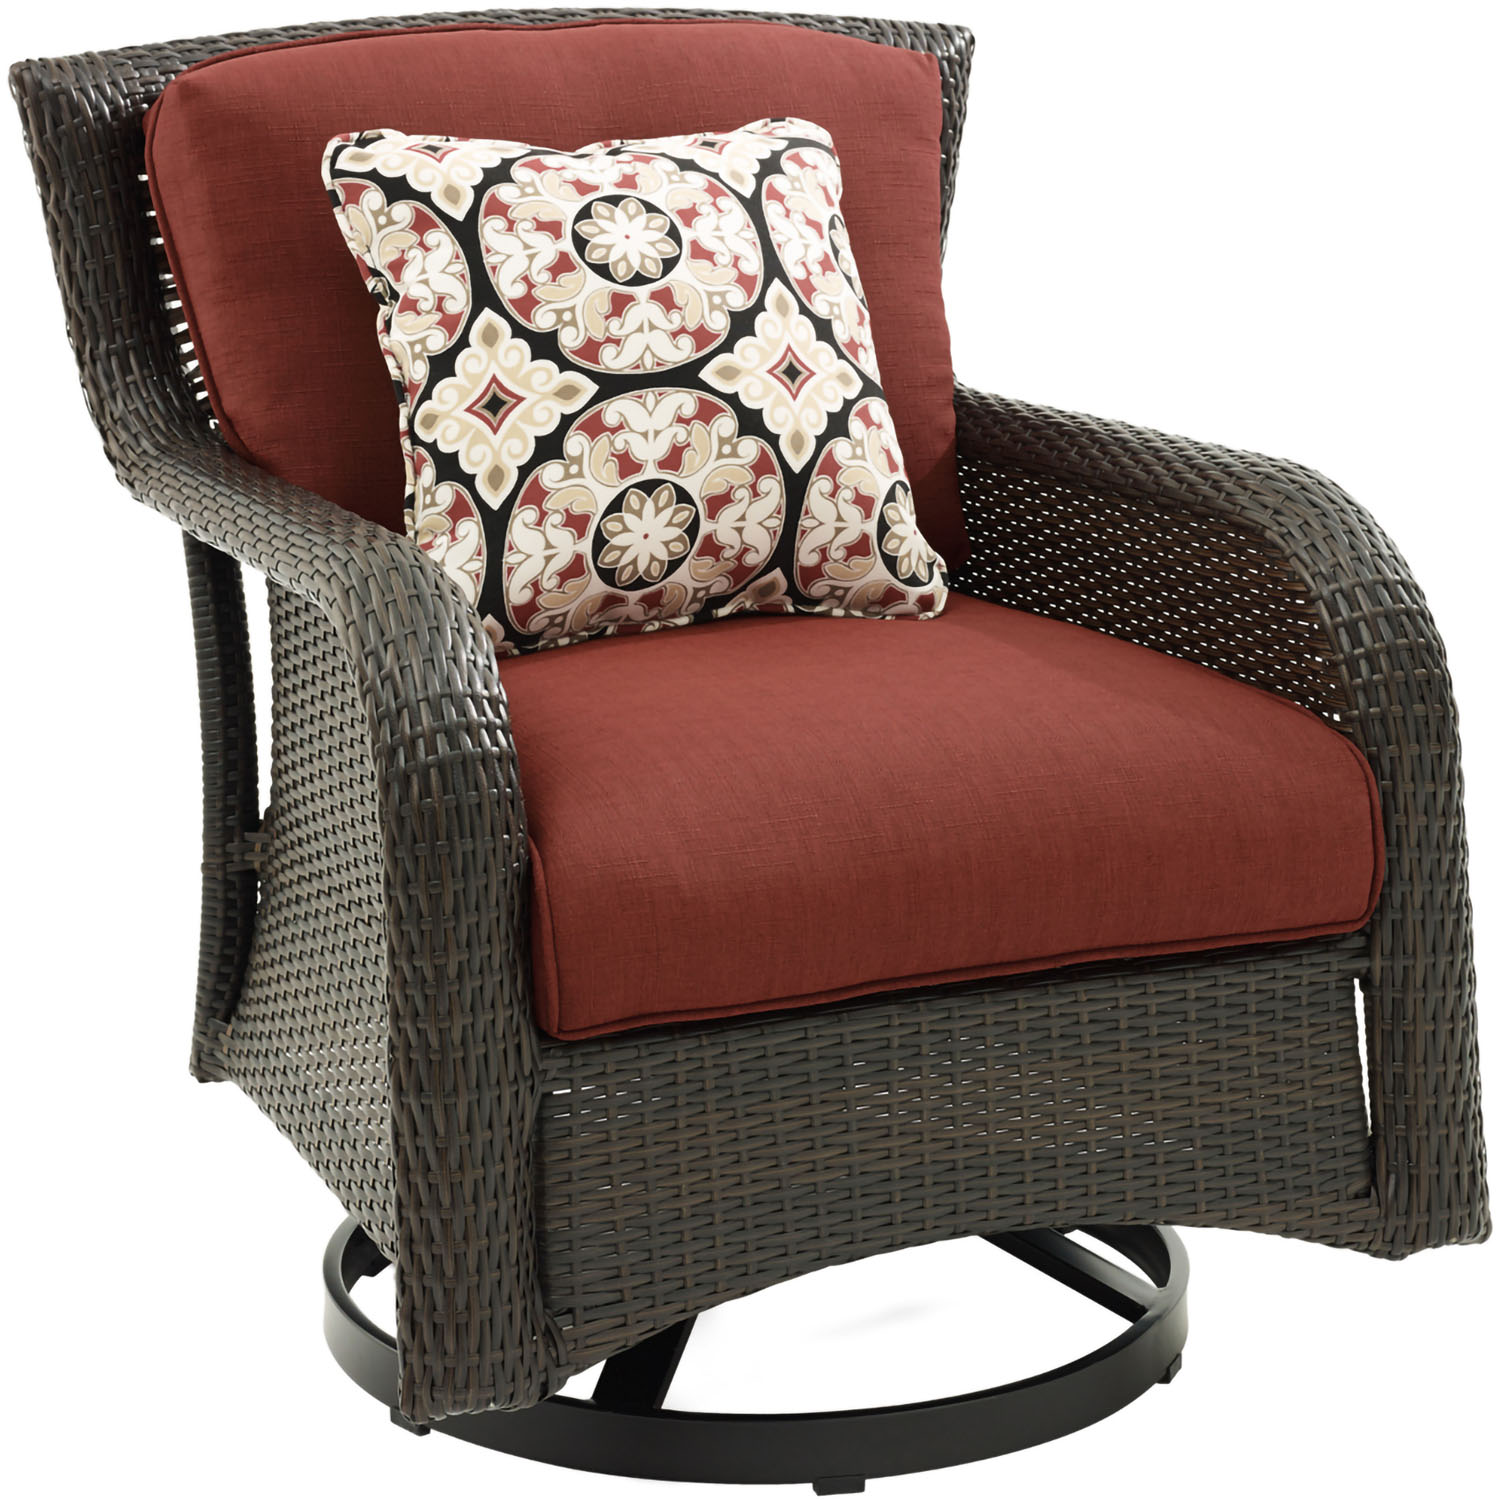 Hanover Strathmere 4-Piece Wicker and Steel Outdoor Conversation Set, Crimson Red - image 4 of 12